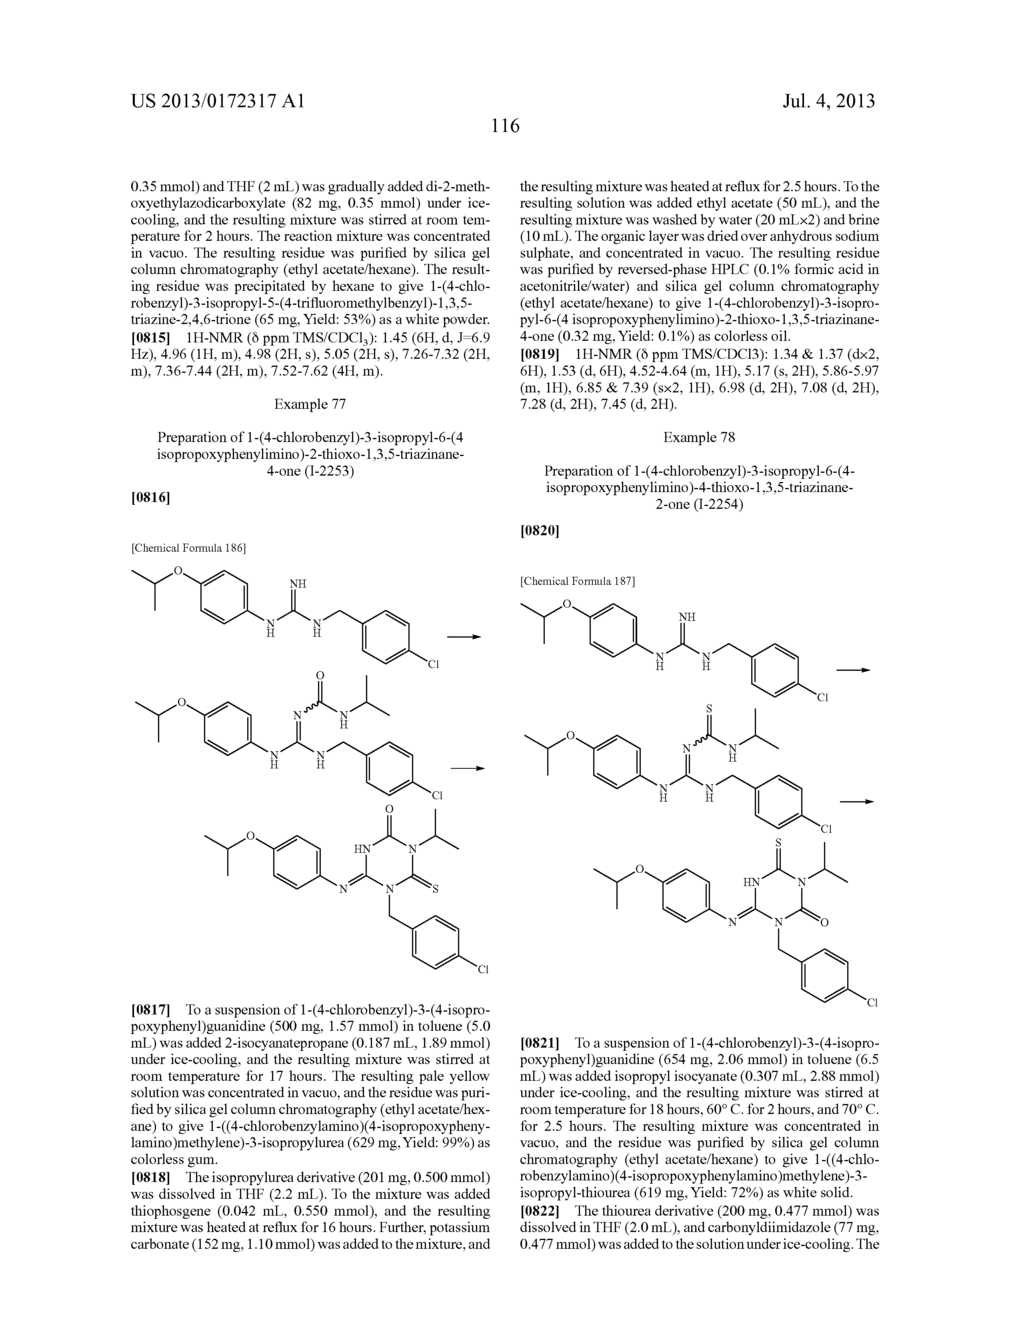 TRIAZINE DERIVATIVE AND PHARMACEUTICAL COMPOSITION HAVING AN ANALGESIC     ACTIVITY COMPRISING THE SAME - diagram, schematic, and image 117